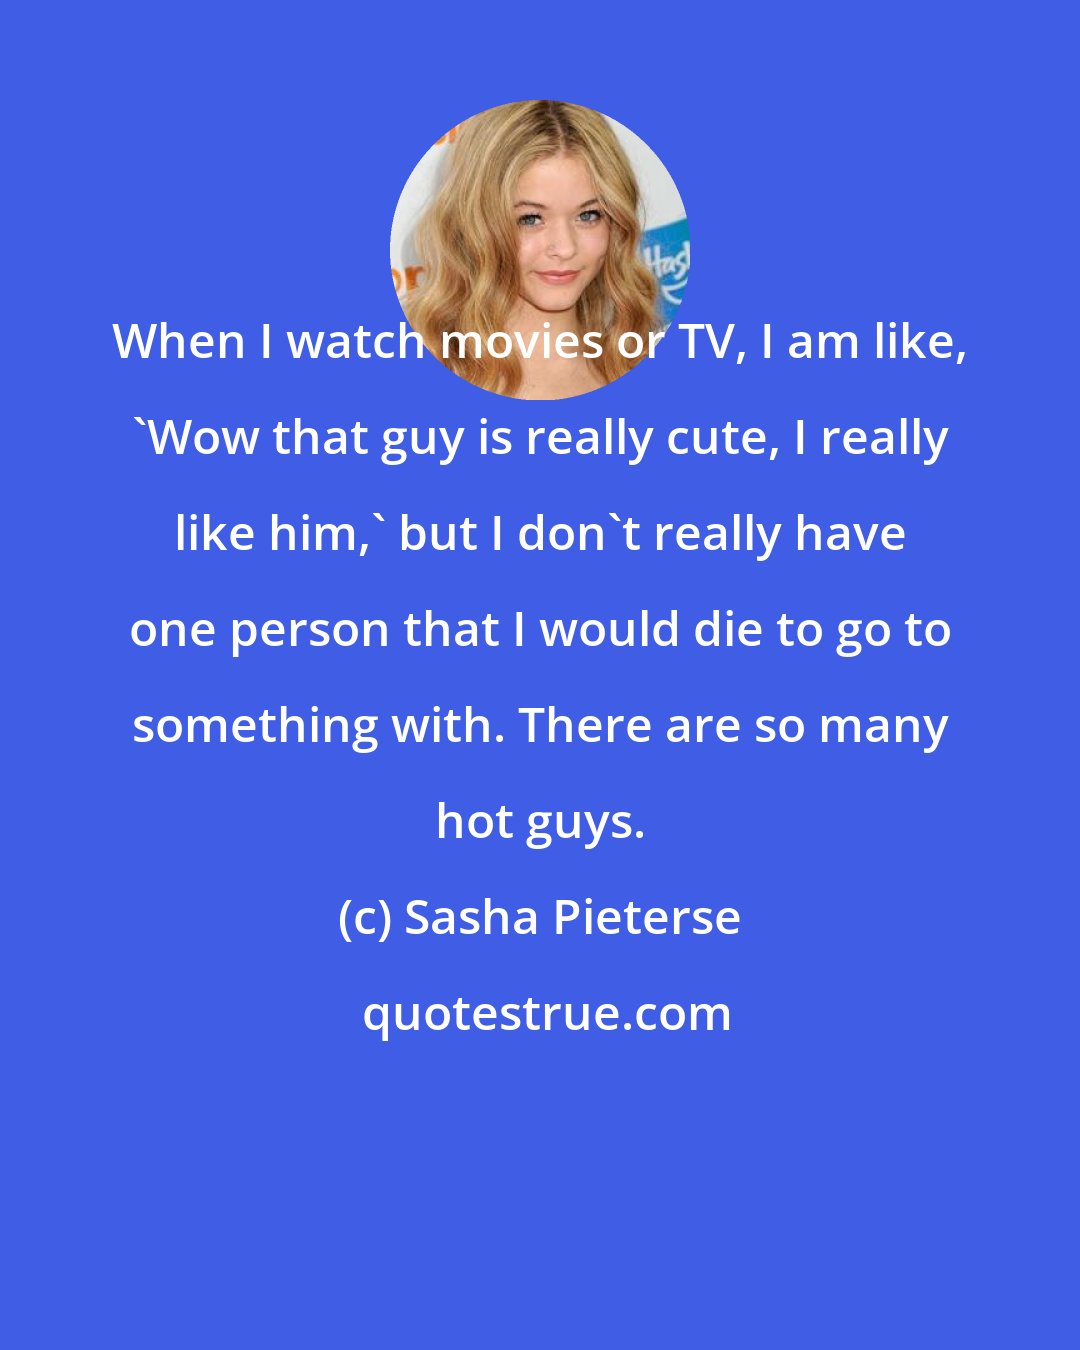 Sasha Pieterse: When I watch movies or TV, I am like, 'Wow that guy is really cute, I really like him,' but I don't really have one person that I would die to go to something with. There are so many hot guys.